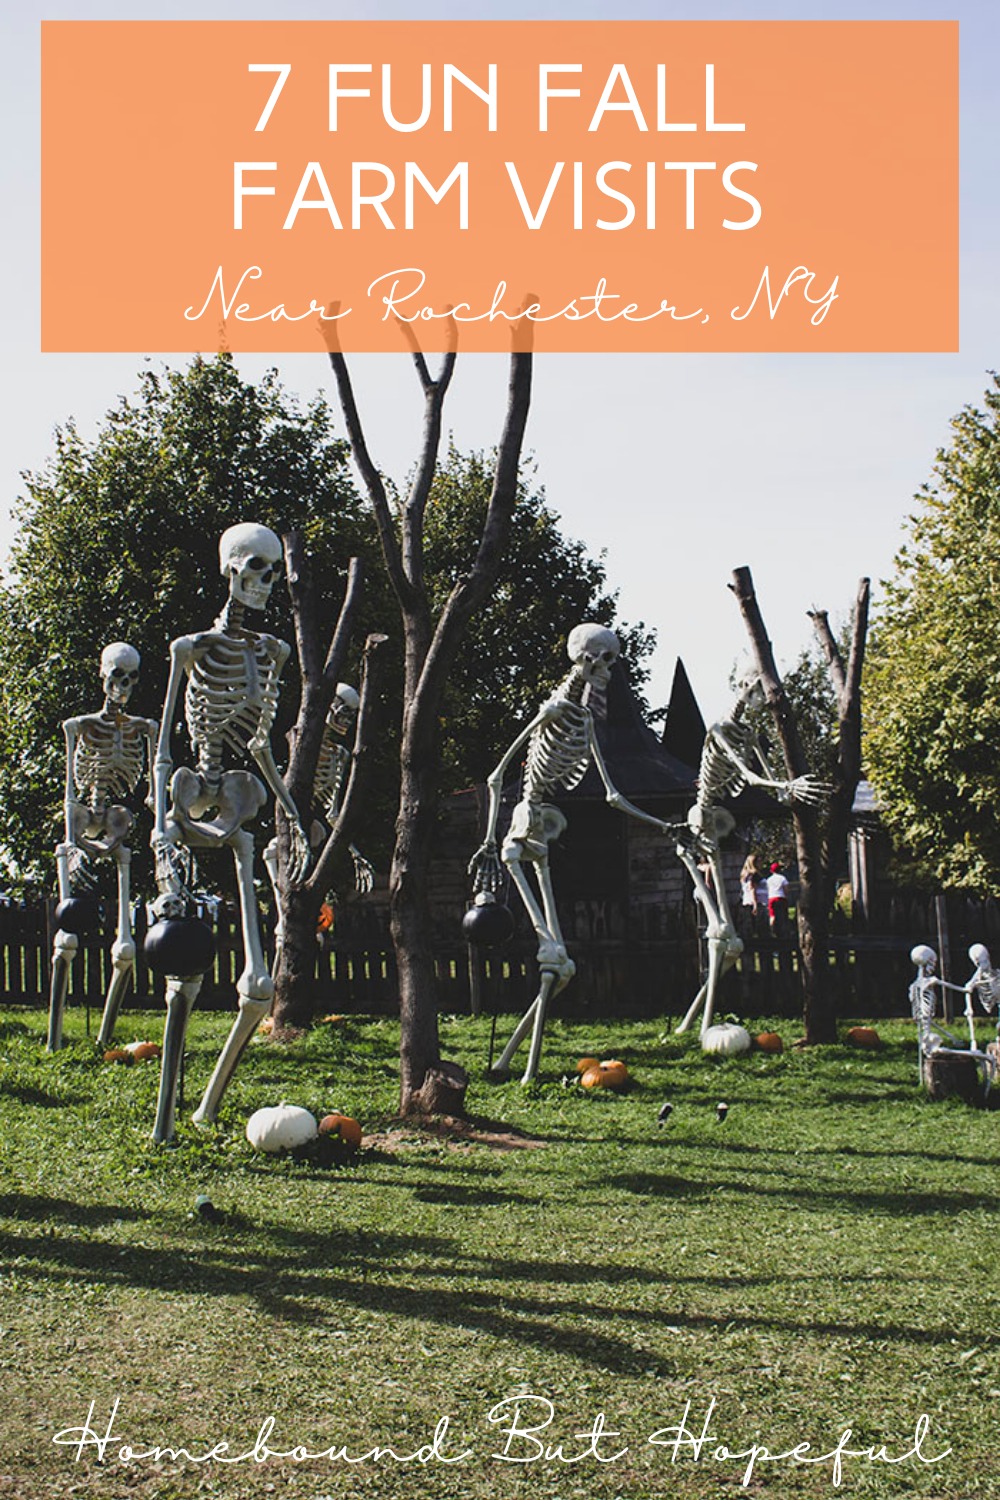 Stay busy this autumn with 7 fun fall farm visits near Rochester NY!